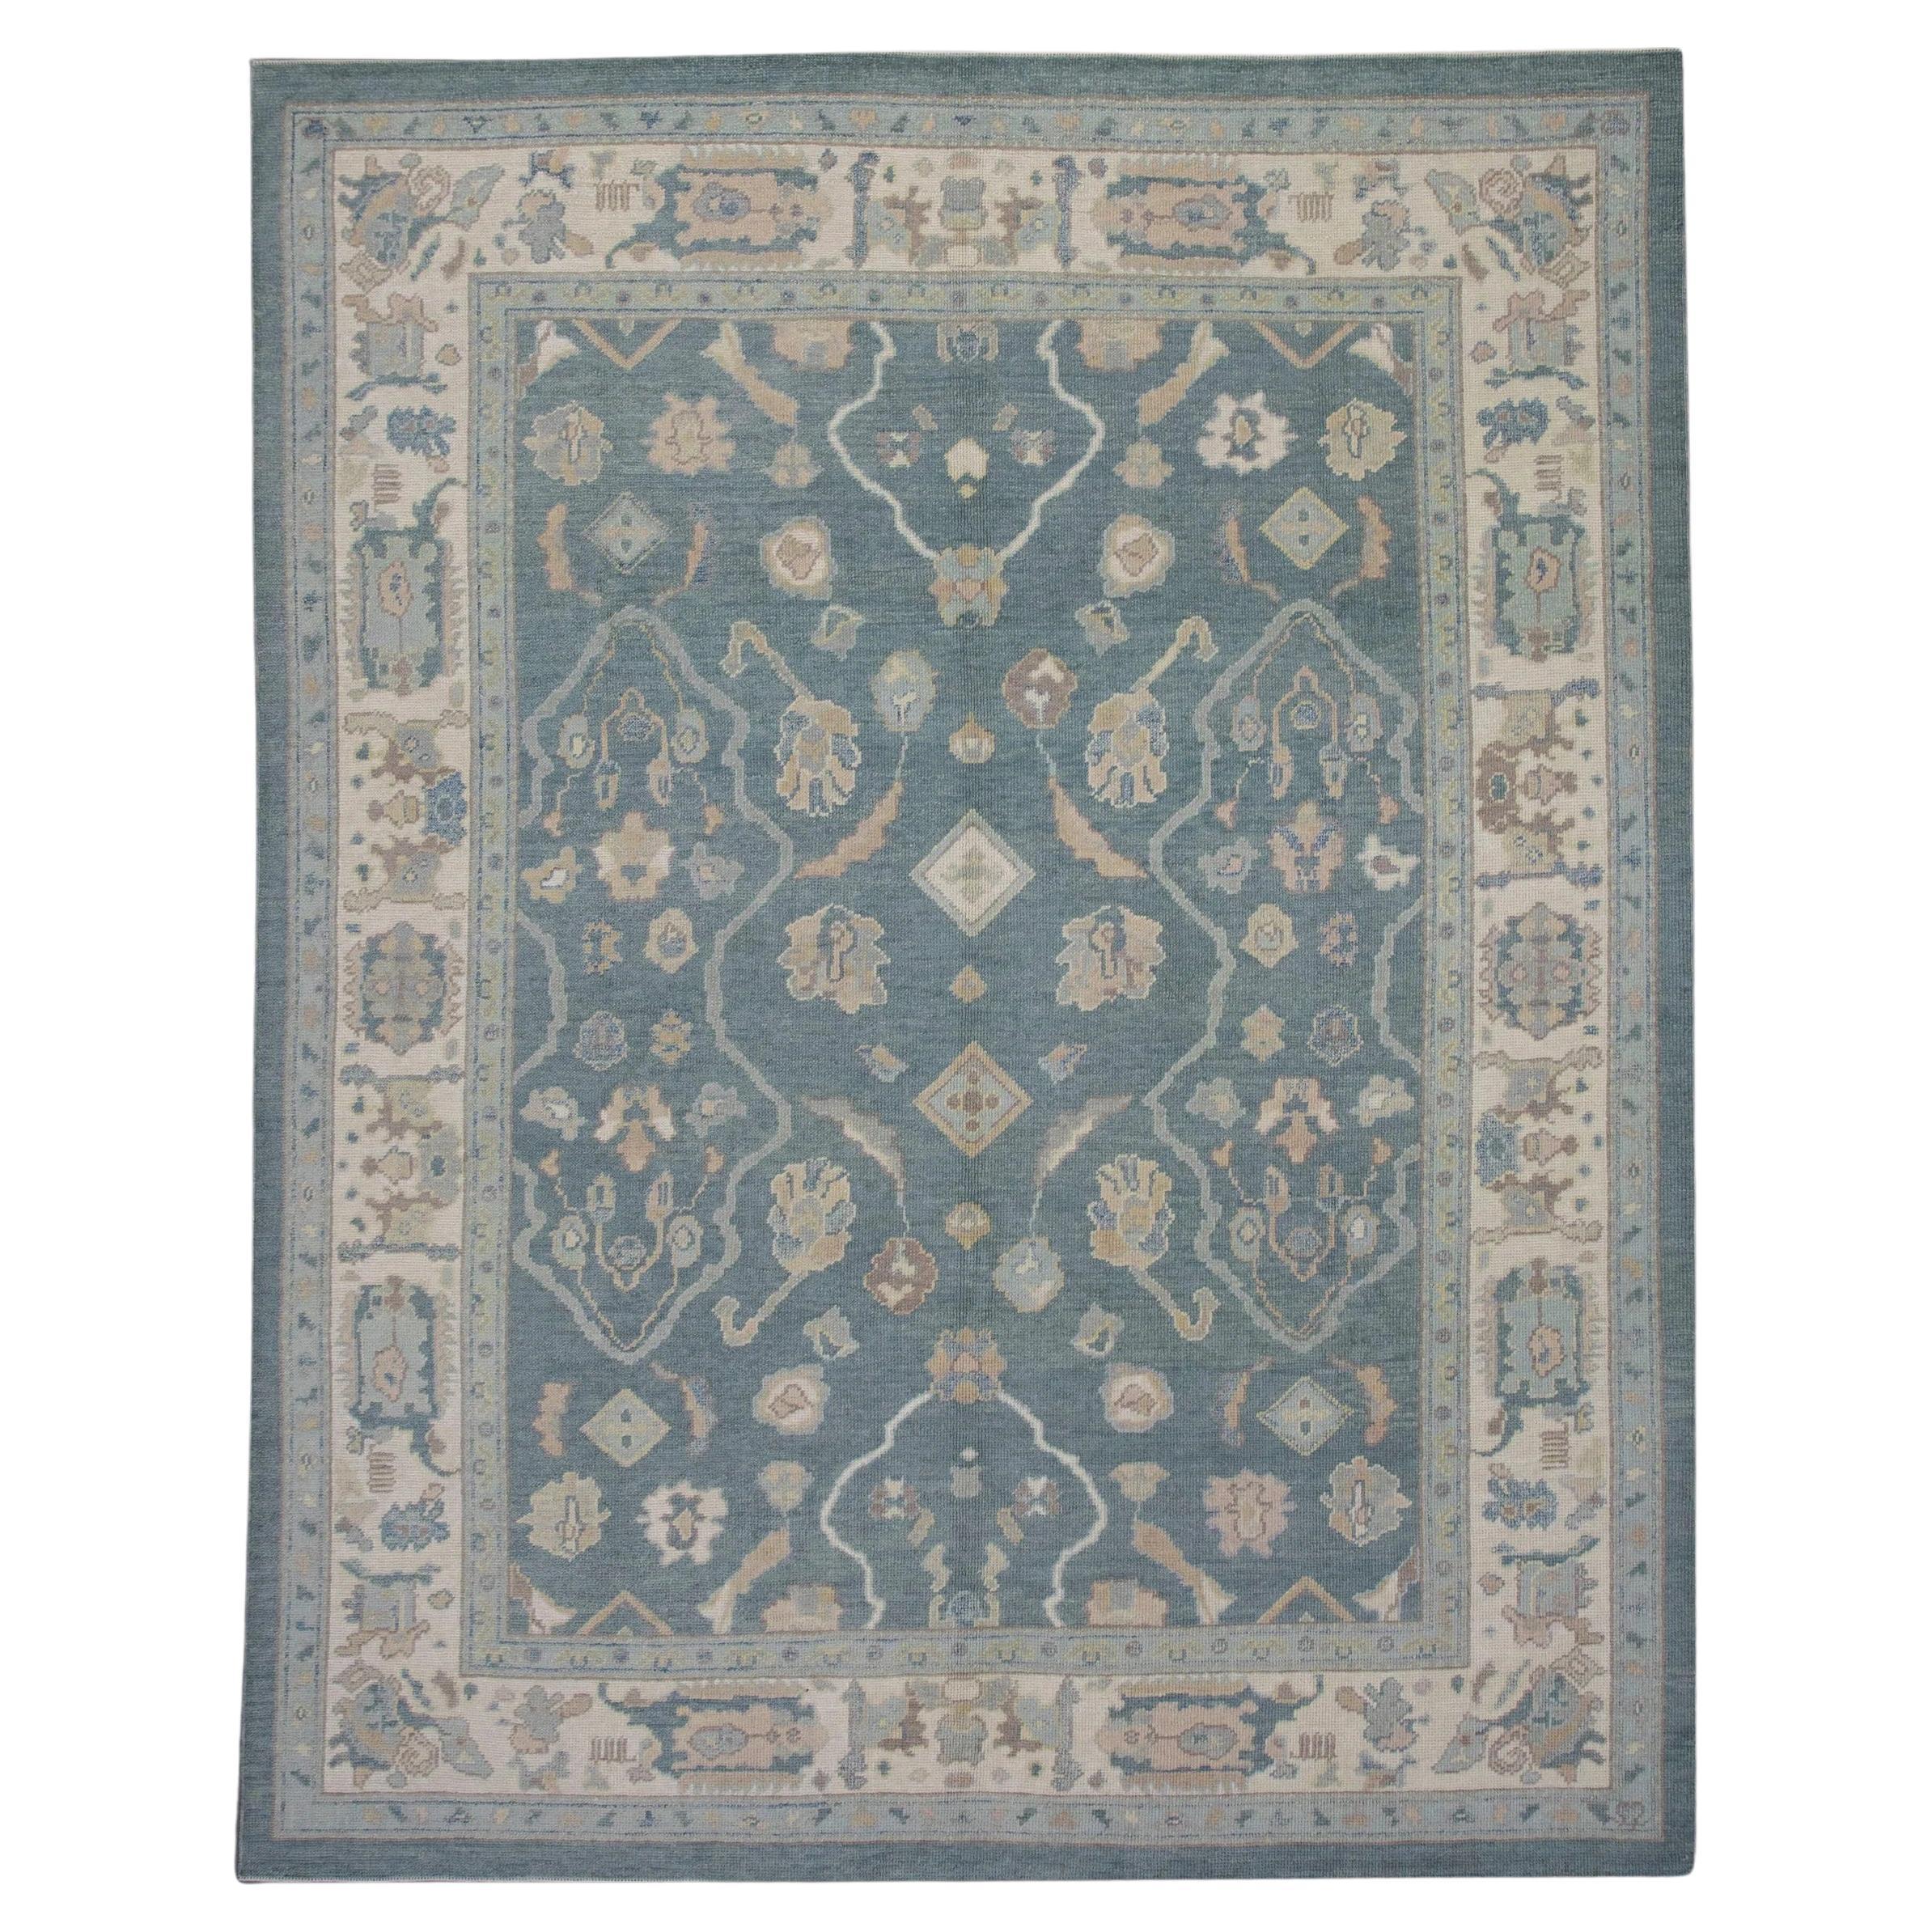 Handwoven Wool Floral Turkish Oushak Rug in Blue and Pink 8'2" x 9'11" For Sale